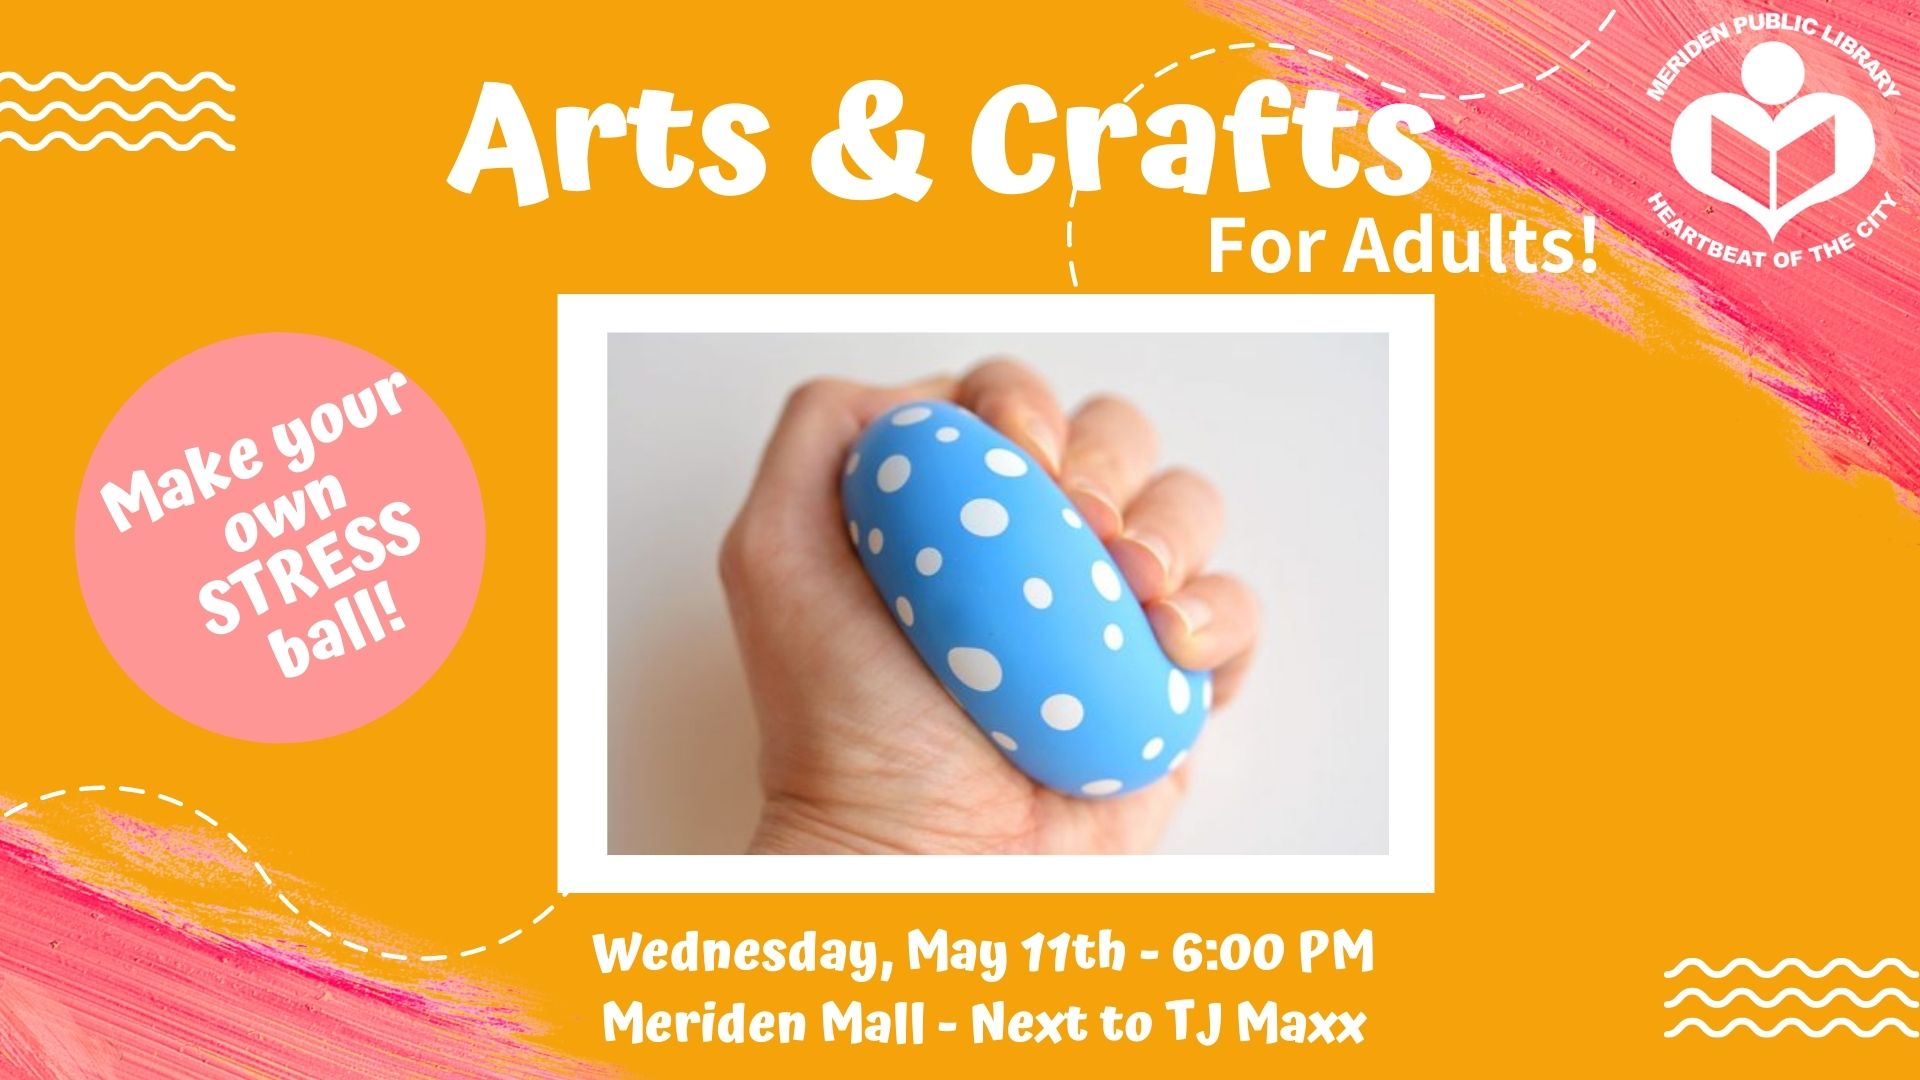 Adult arts & crafts series: Make your own stress ball